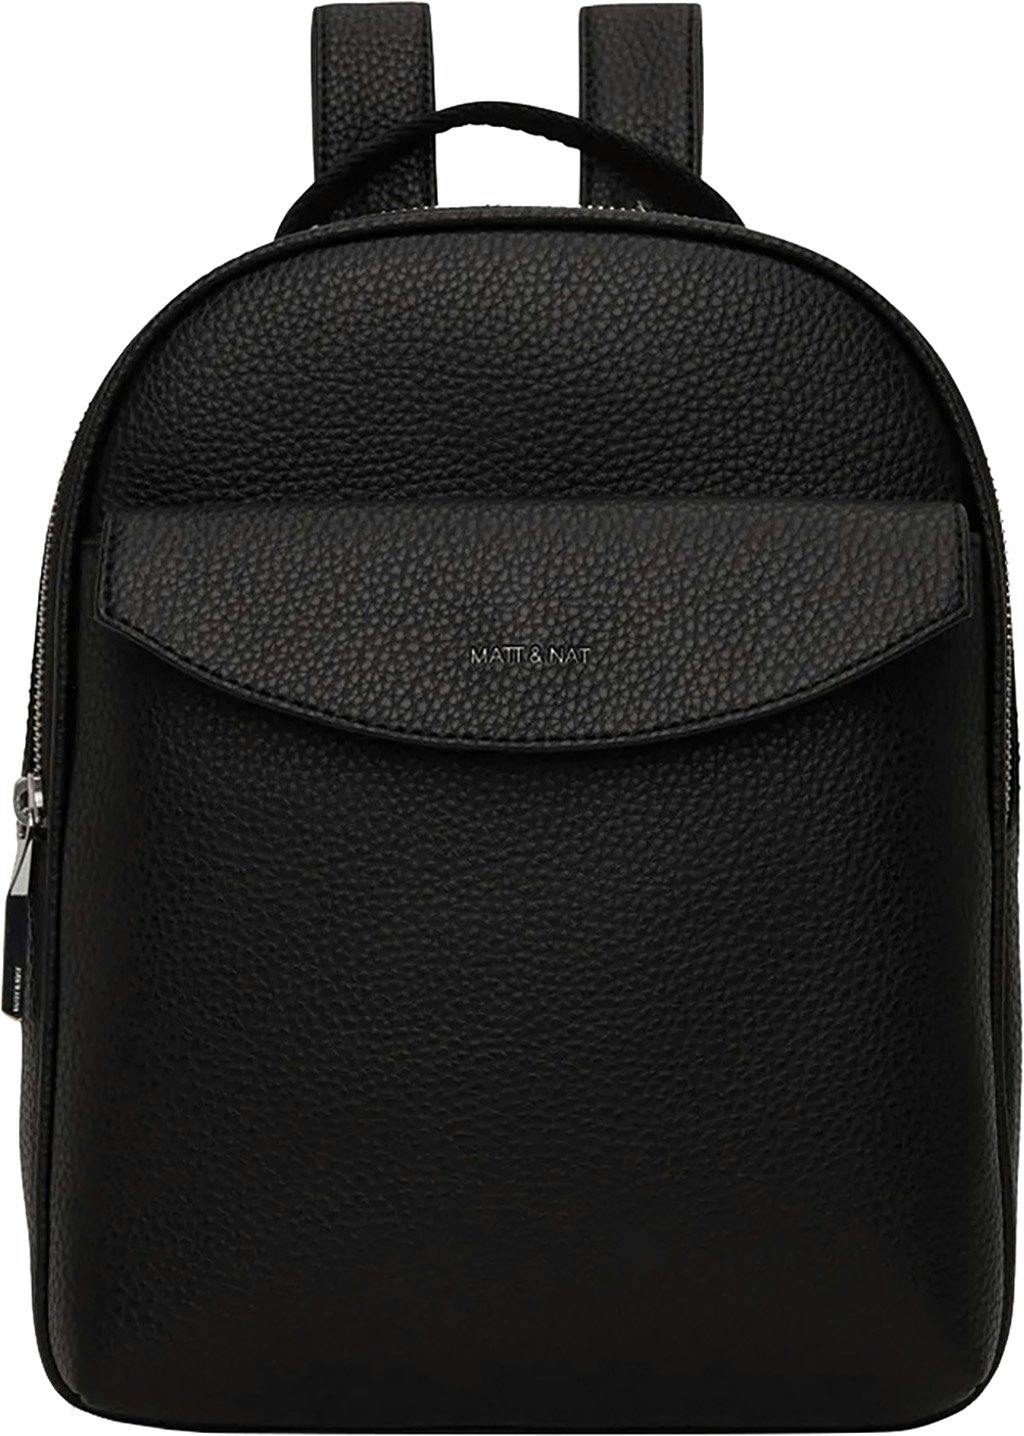 Product image for Harlem Backpack - Purity Collection 7L - Women's